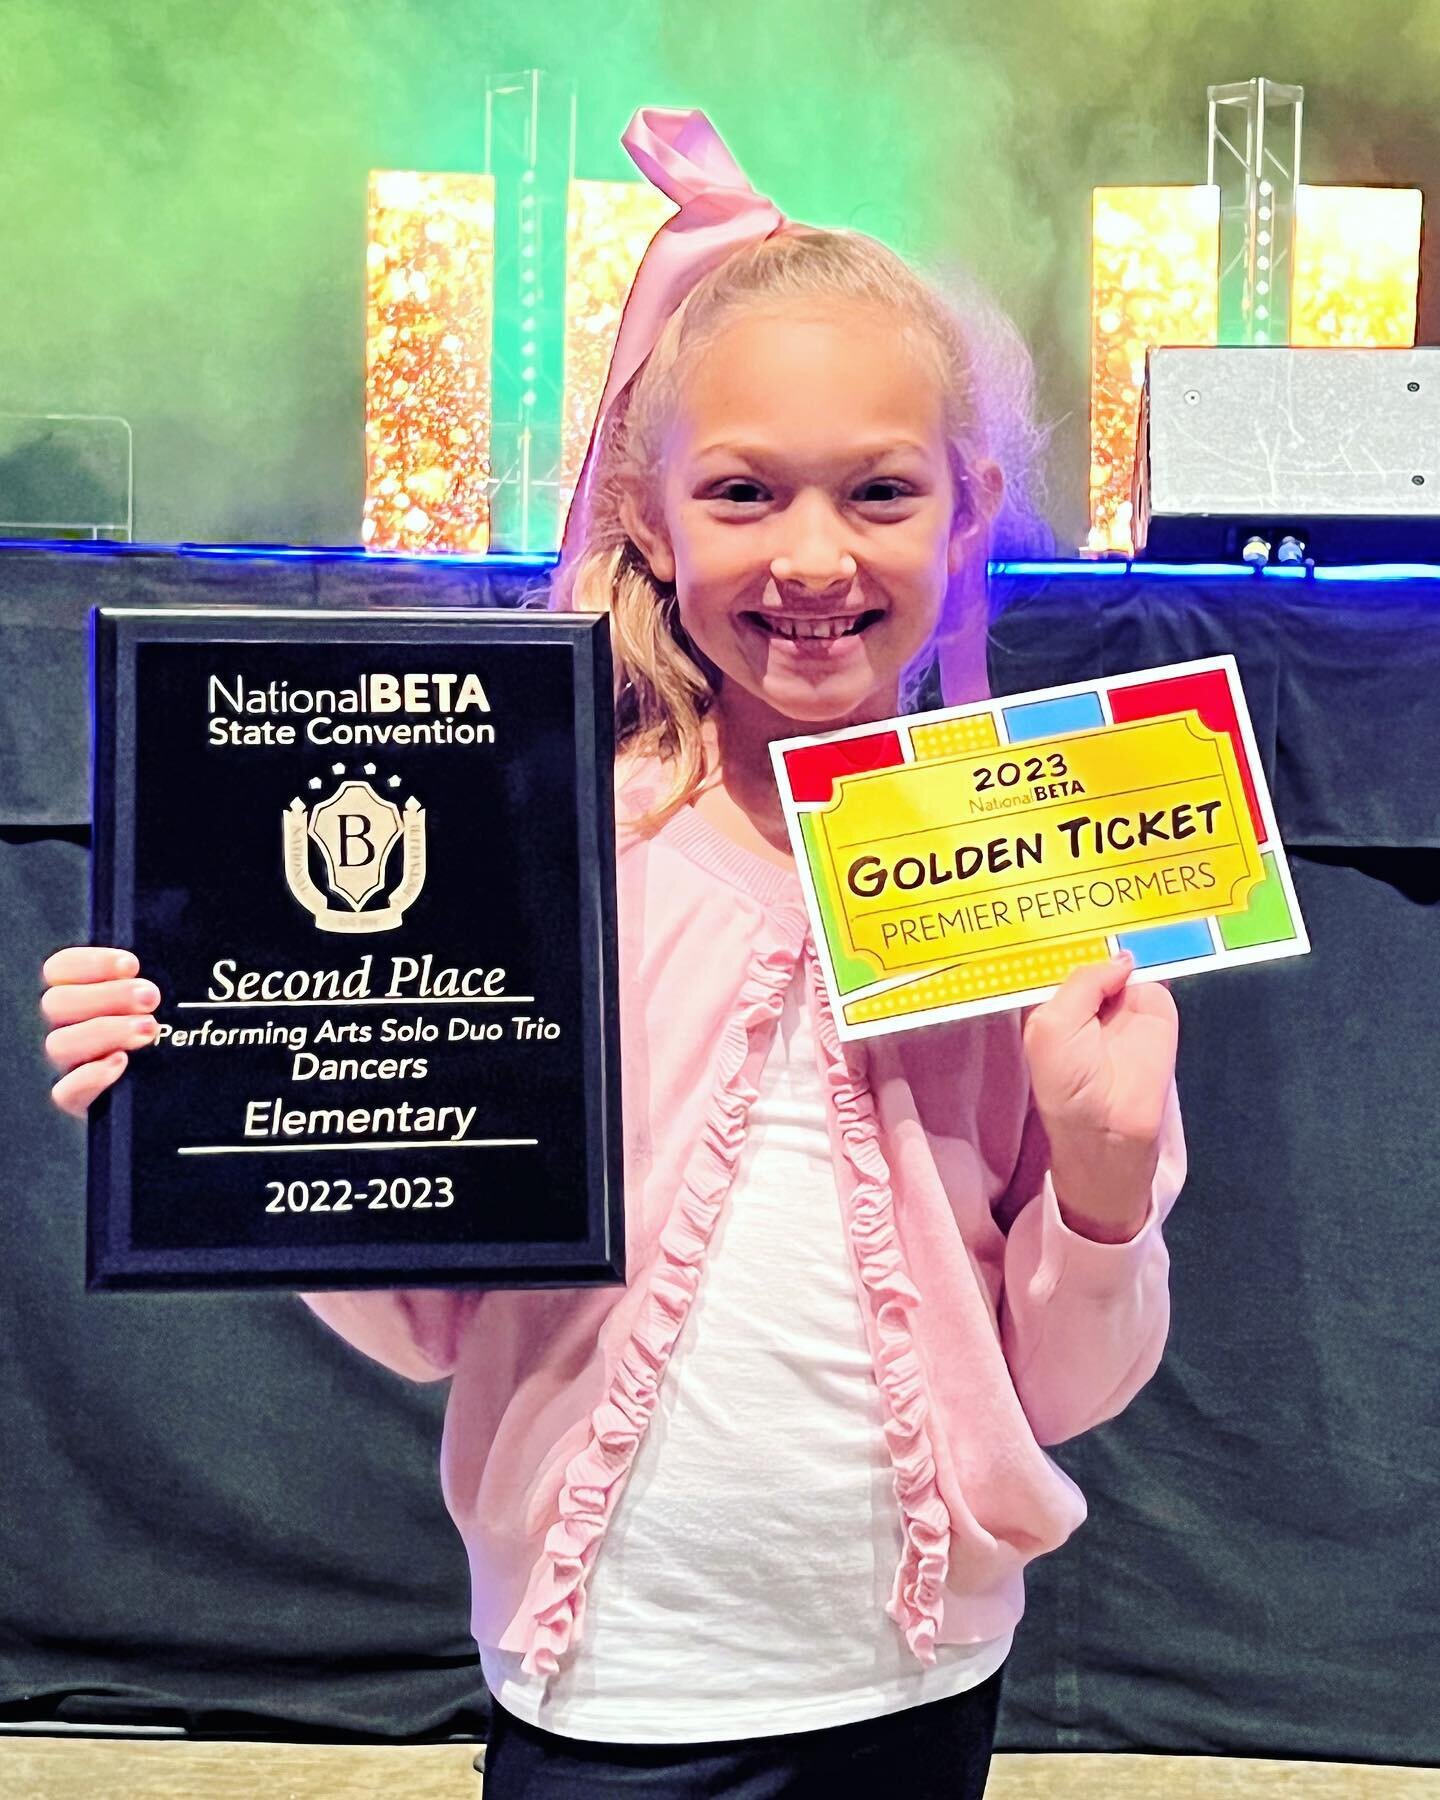 Our sweet Kendall placed second in the state BETA club convention today. She also received a Golden Ticket to be an opening performer at the National convention. 
We are SO proud of Kendall and all of her accomplishments💎
#BETA #batontwirling #GEMNA